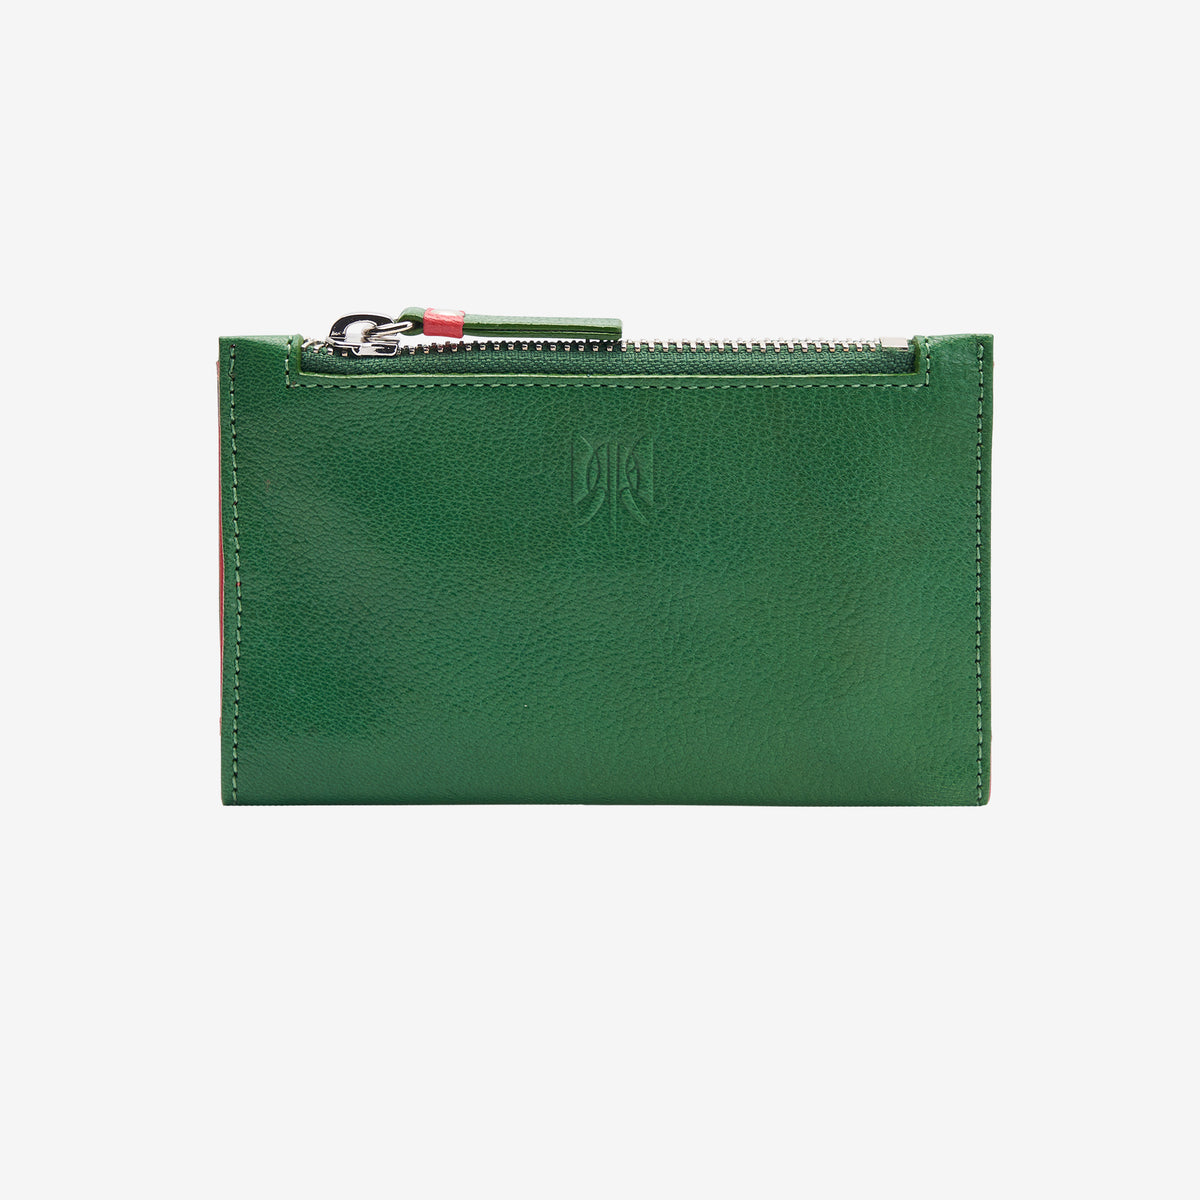     tusk-383-leather-slim-card-case-with-zip-coin-pocket-jade-and-geranium-front